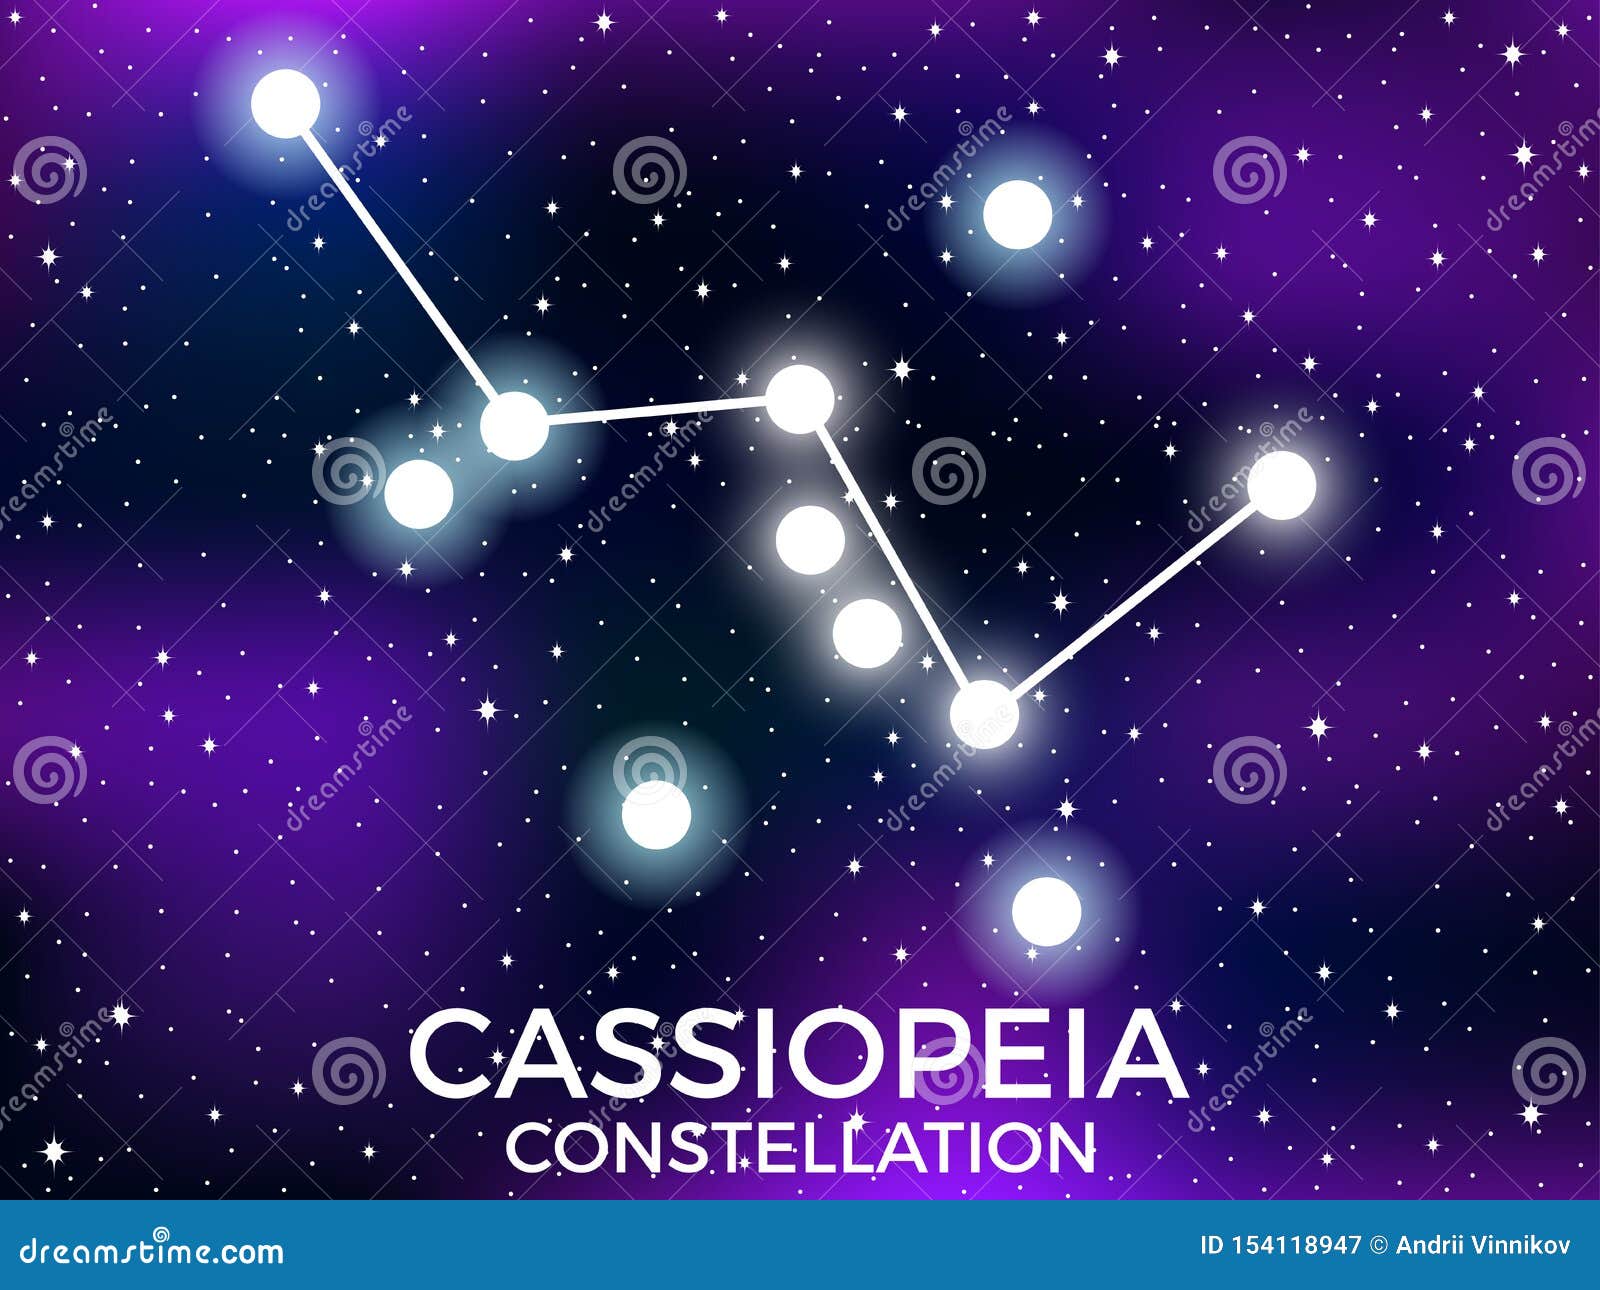 The Cassiopeia Constellation - Universe Today